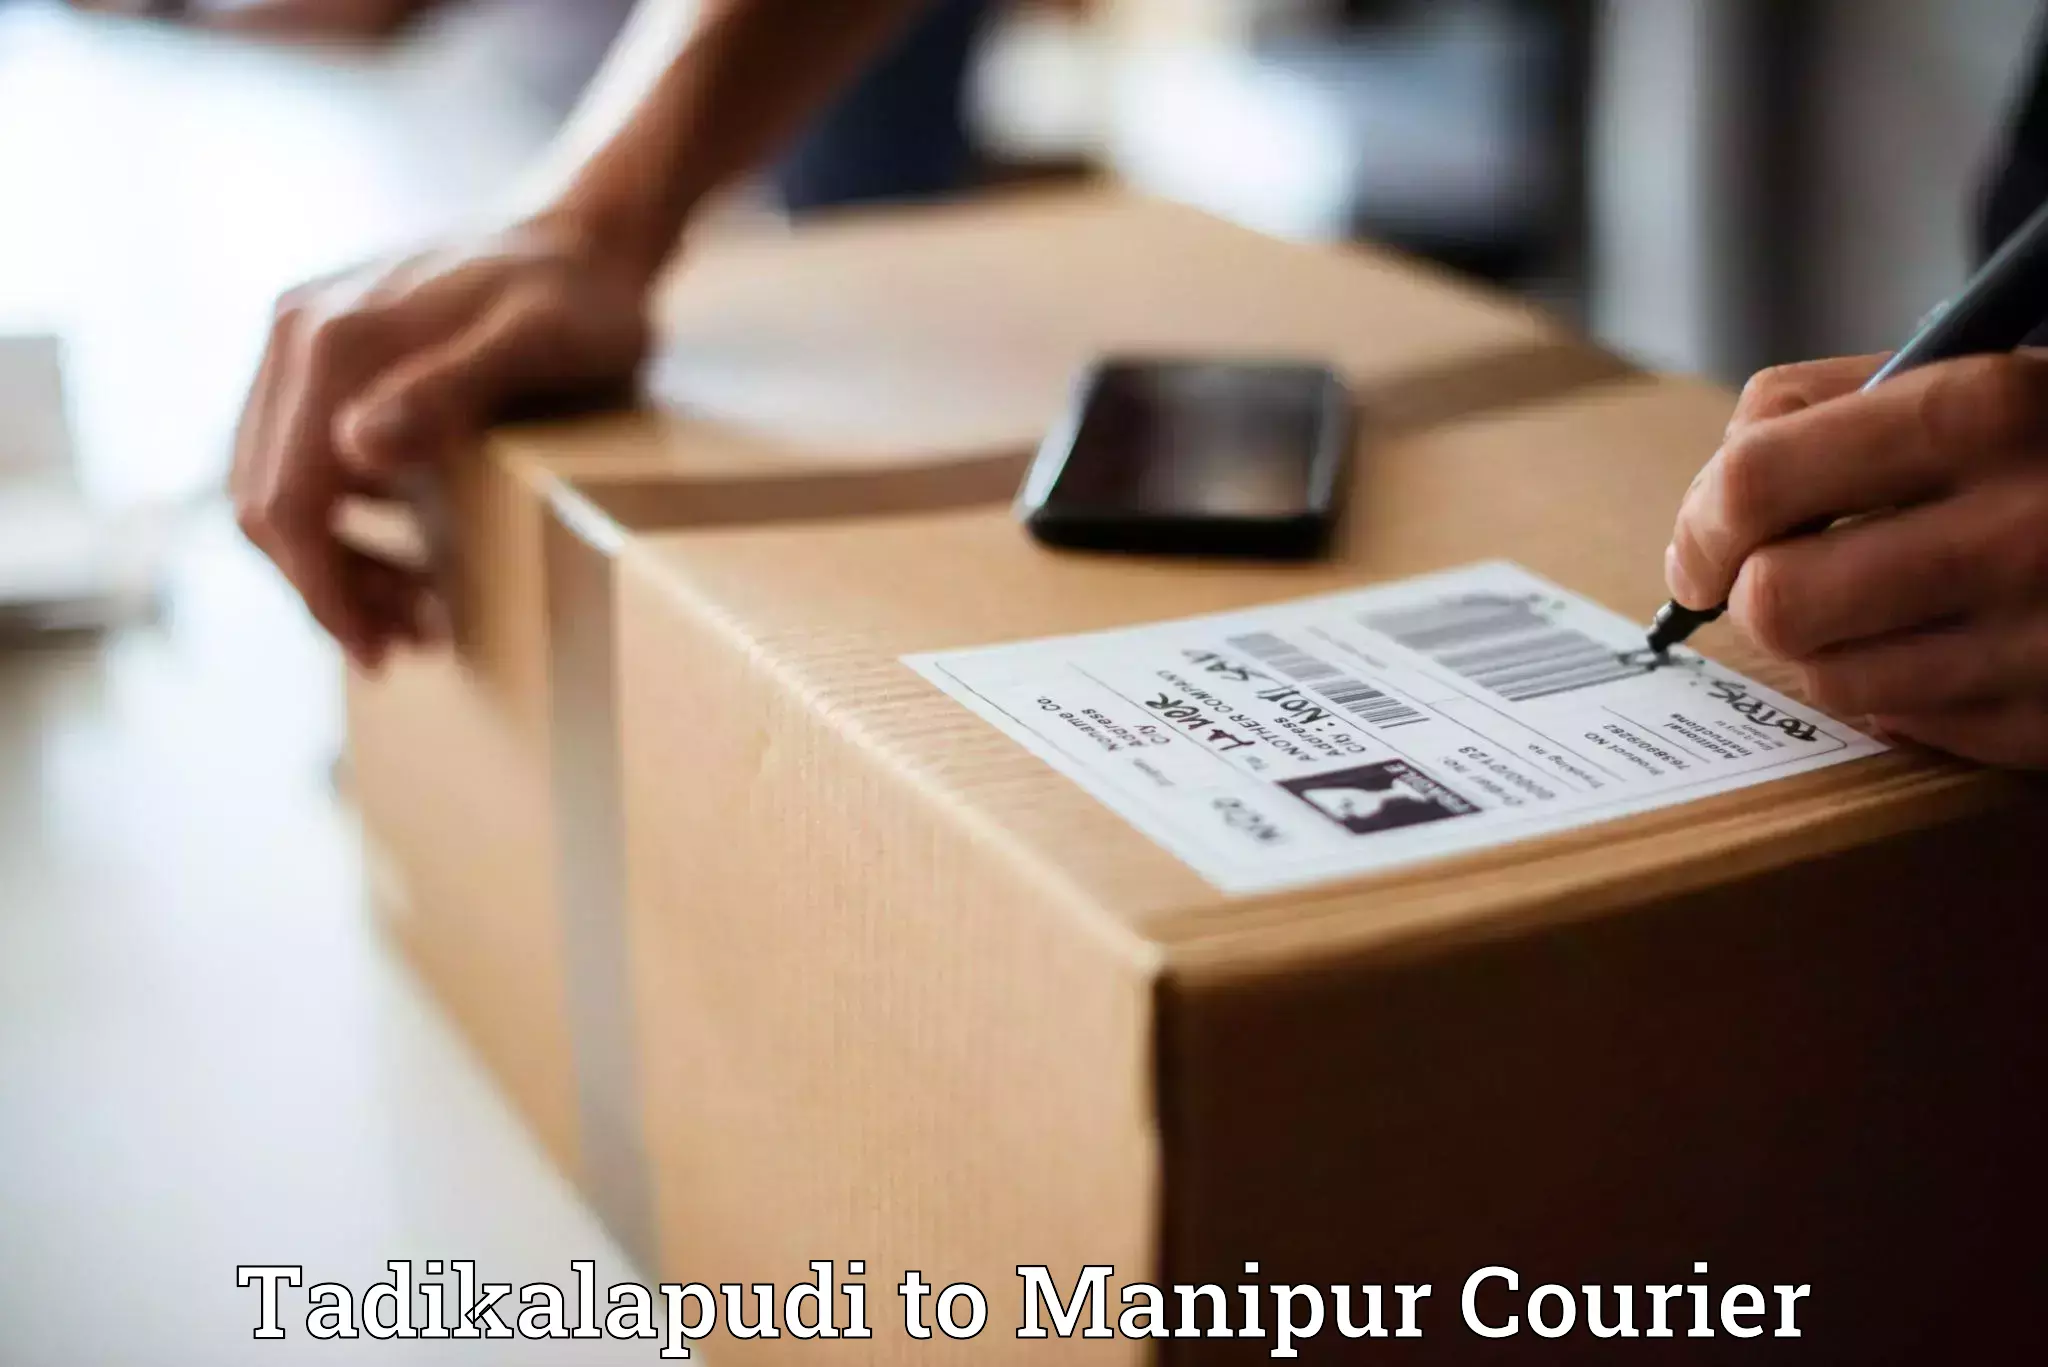 Reliable delivery network Tadikalapudi to Manipur